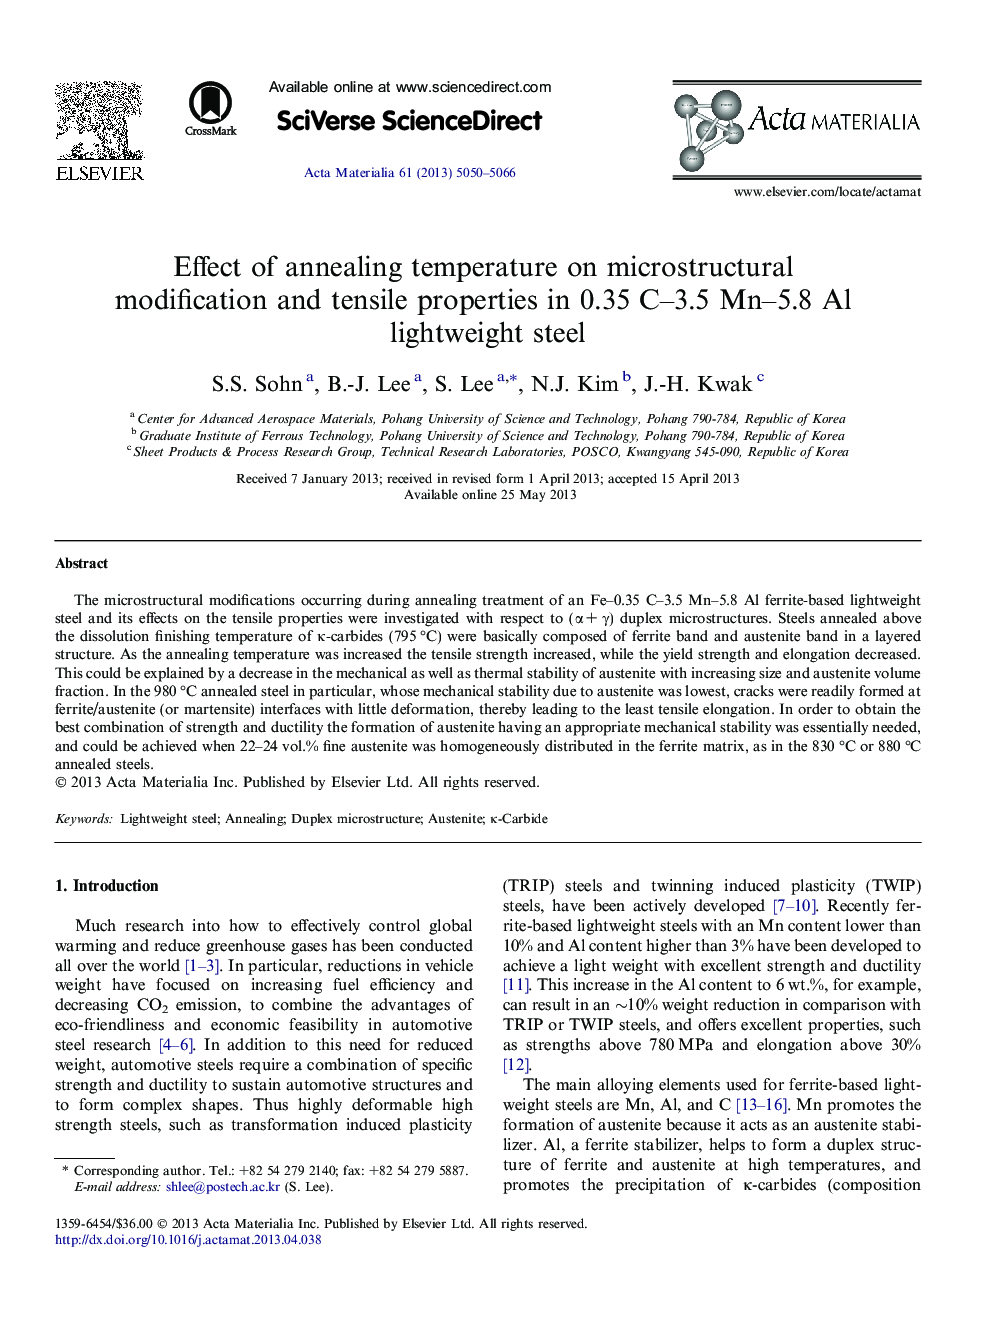 Effect of annealing temperature on microstructural modification and tensile properties in 0.35 C–3.5 Mn–5.8 Al lightweight steel